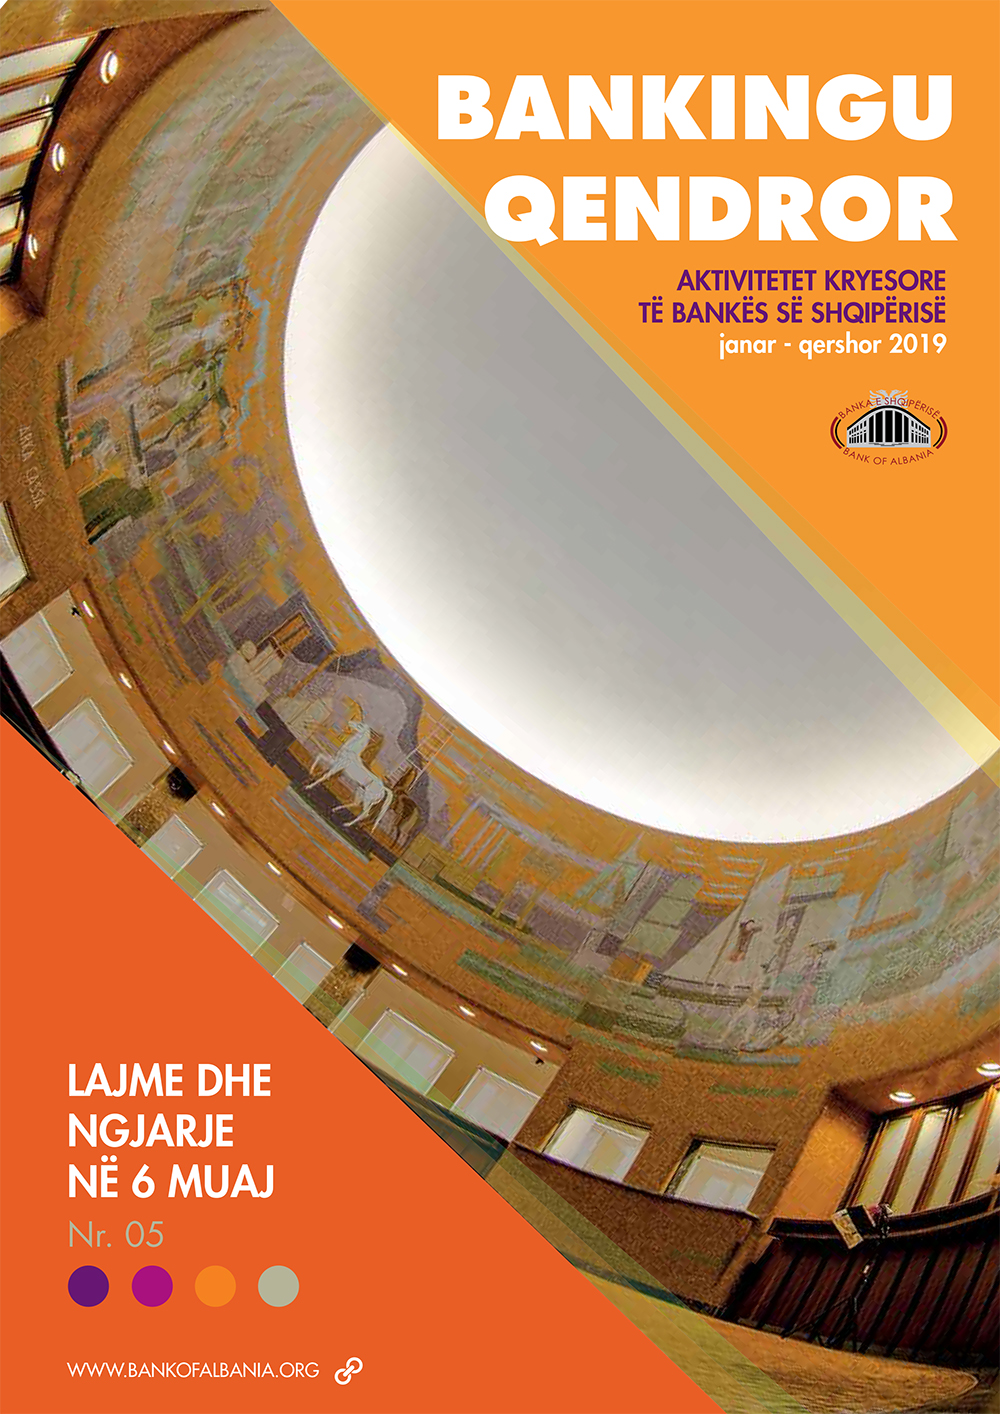 Central Banking magazine, January - June 2019